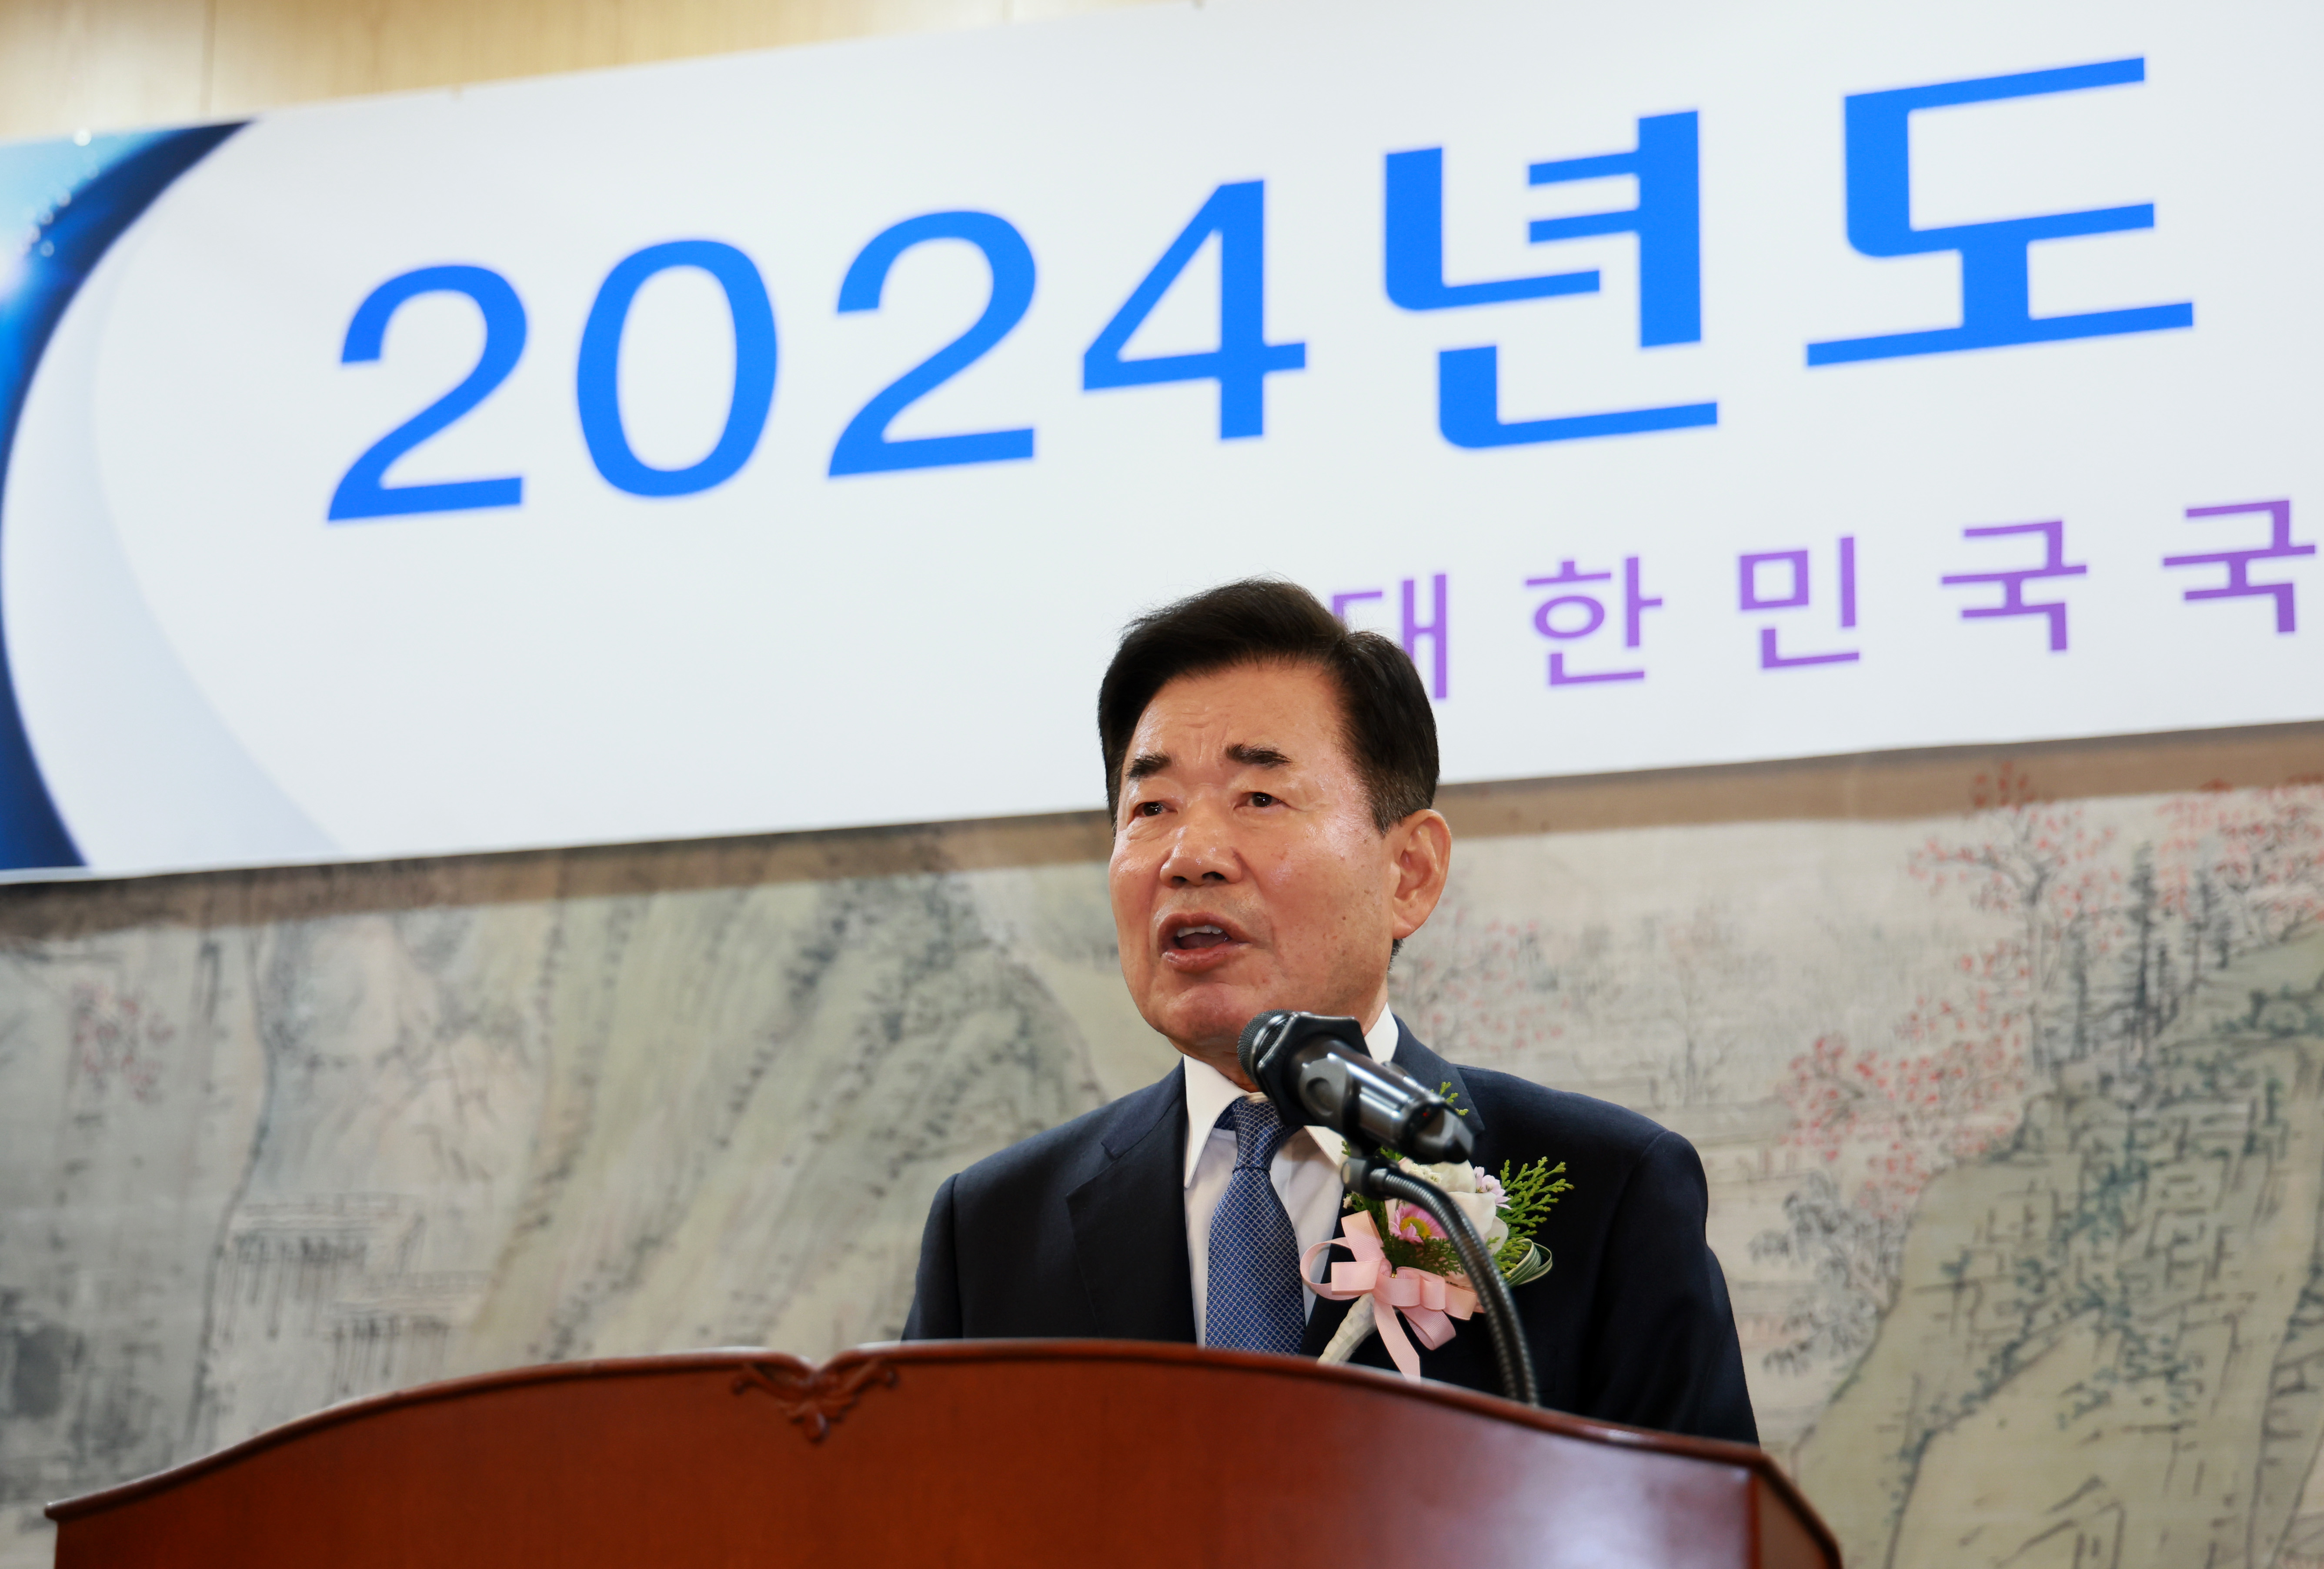 Speaker attends Assembly&rsquo;s New Year kick-off ceremony 관련사진 4 보기